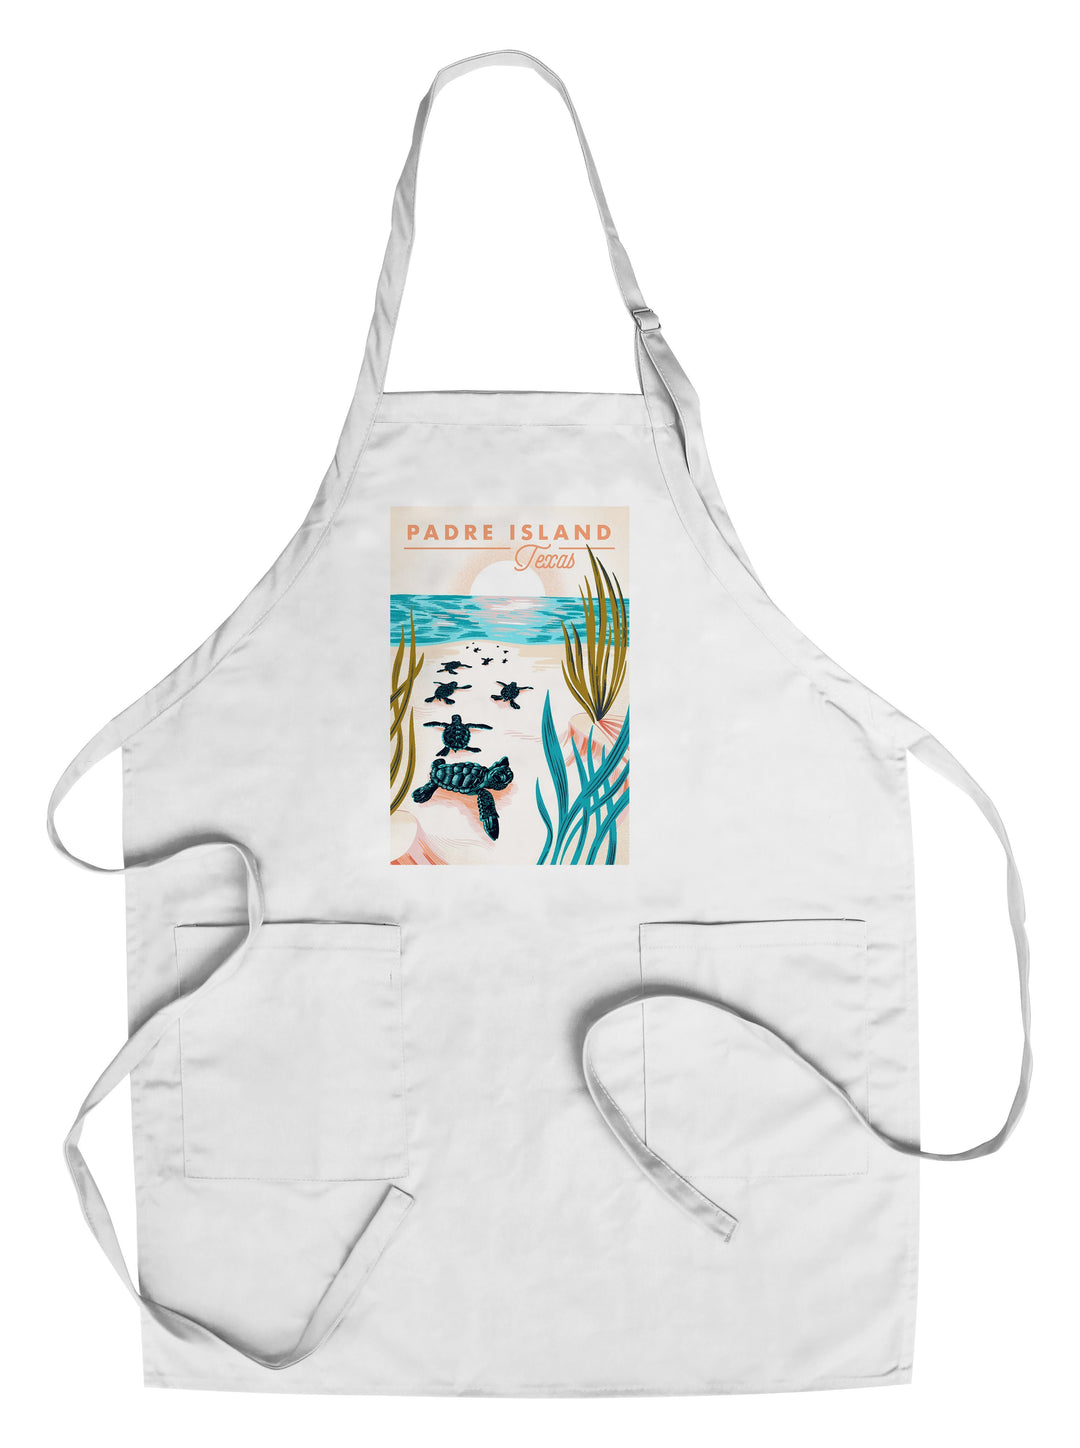 Padre Island, Texas, Courageous Explorer Collection, Turtles on Beach, Pause Respect Protect, Towels and Aprons Kitchen Lantern Press Chef's Apron 